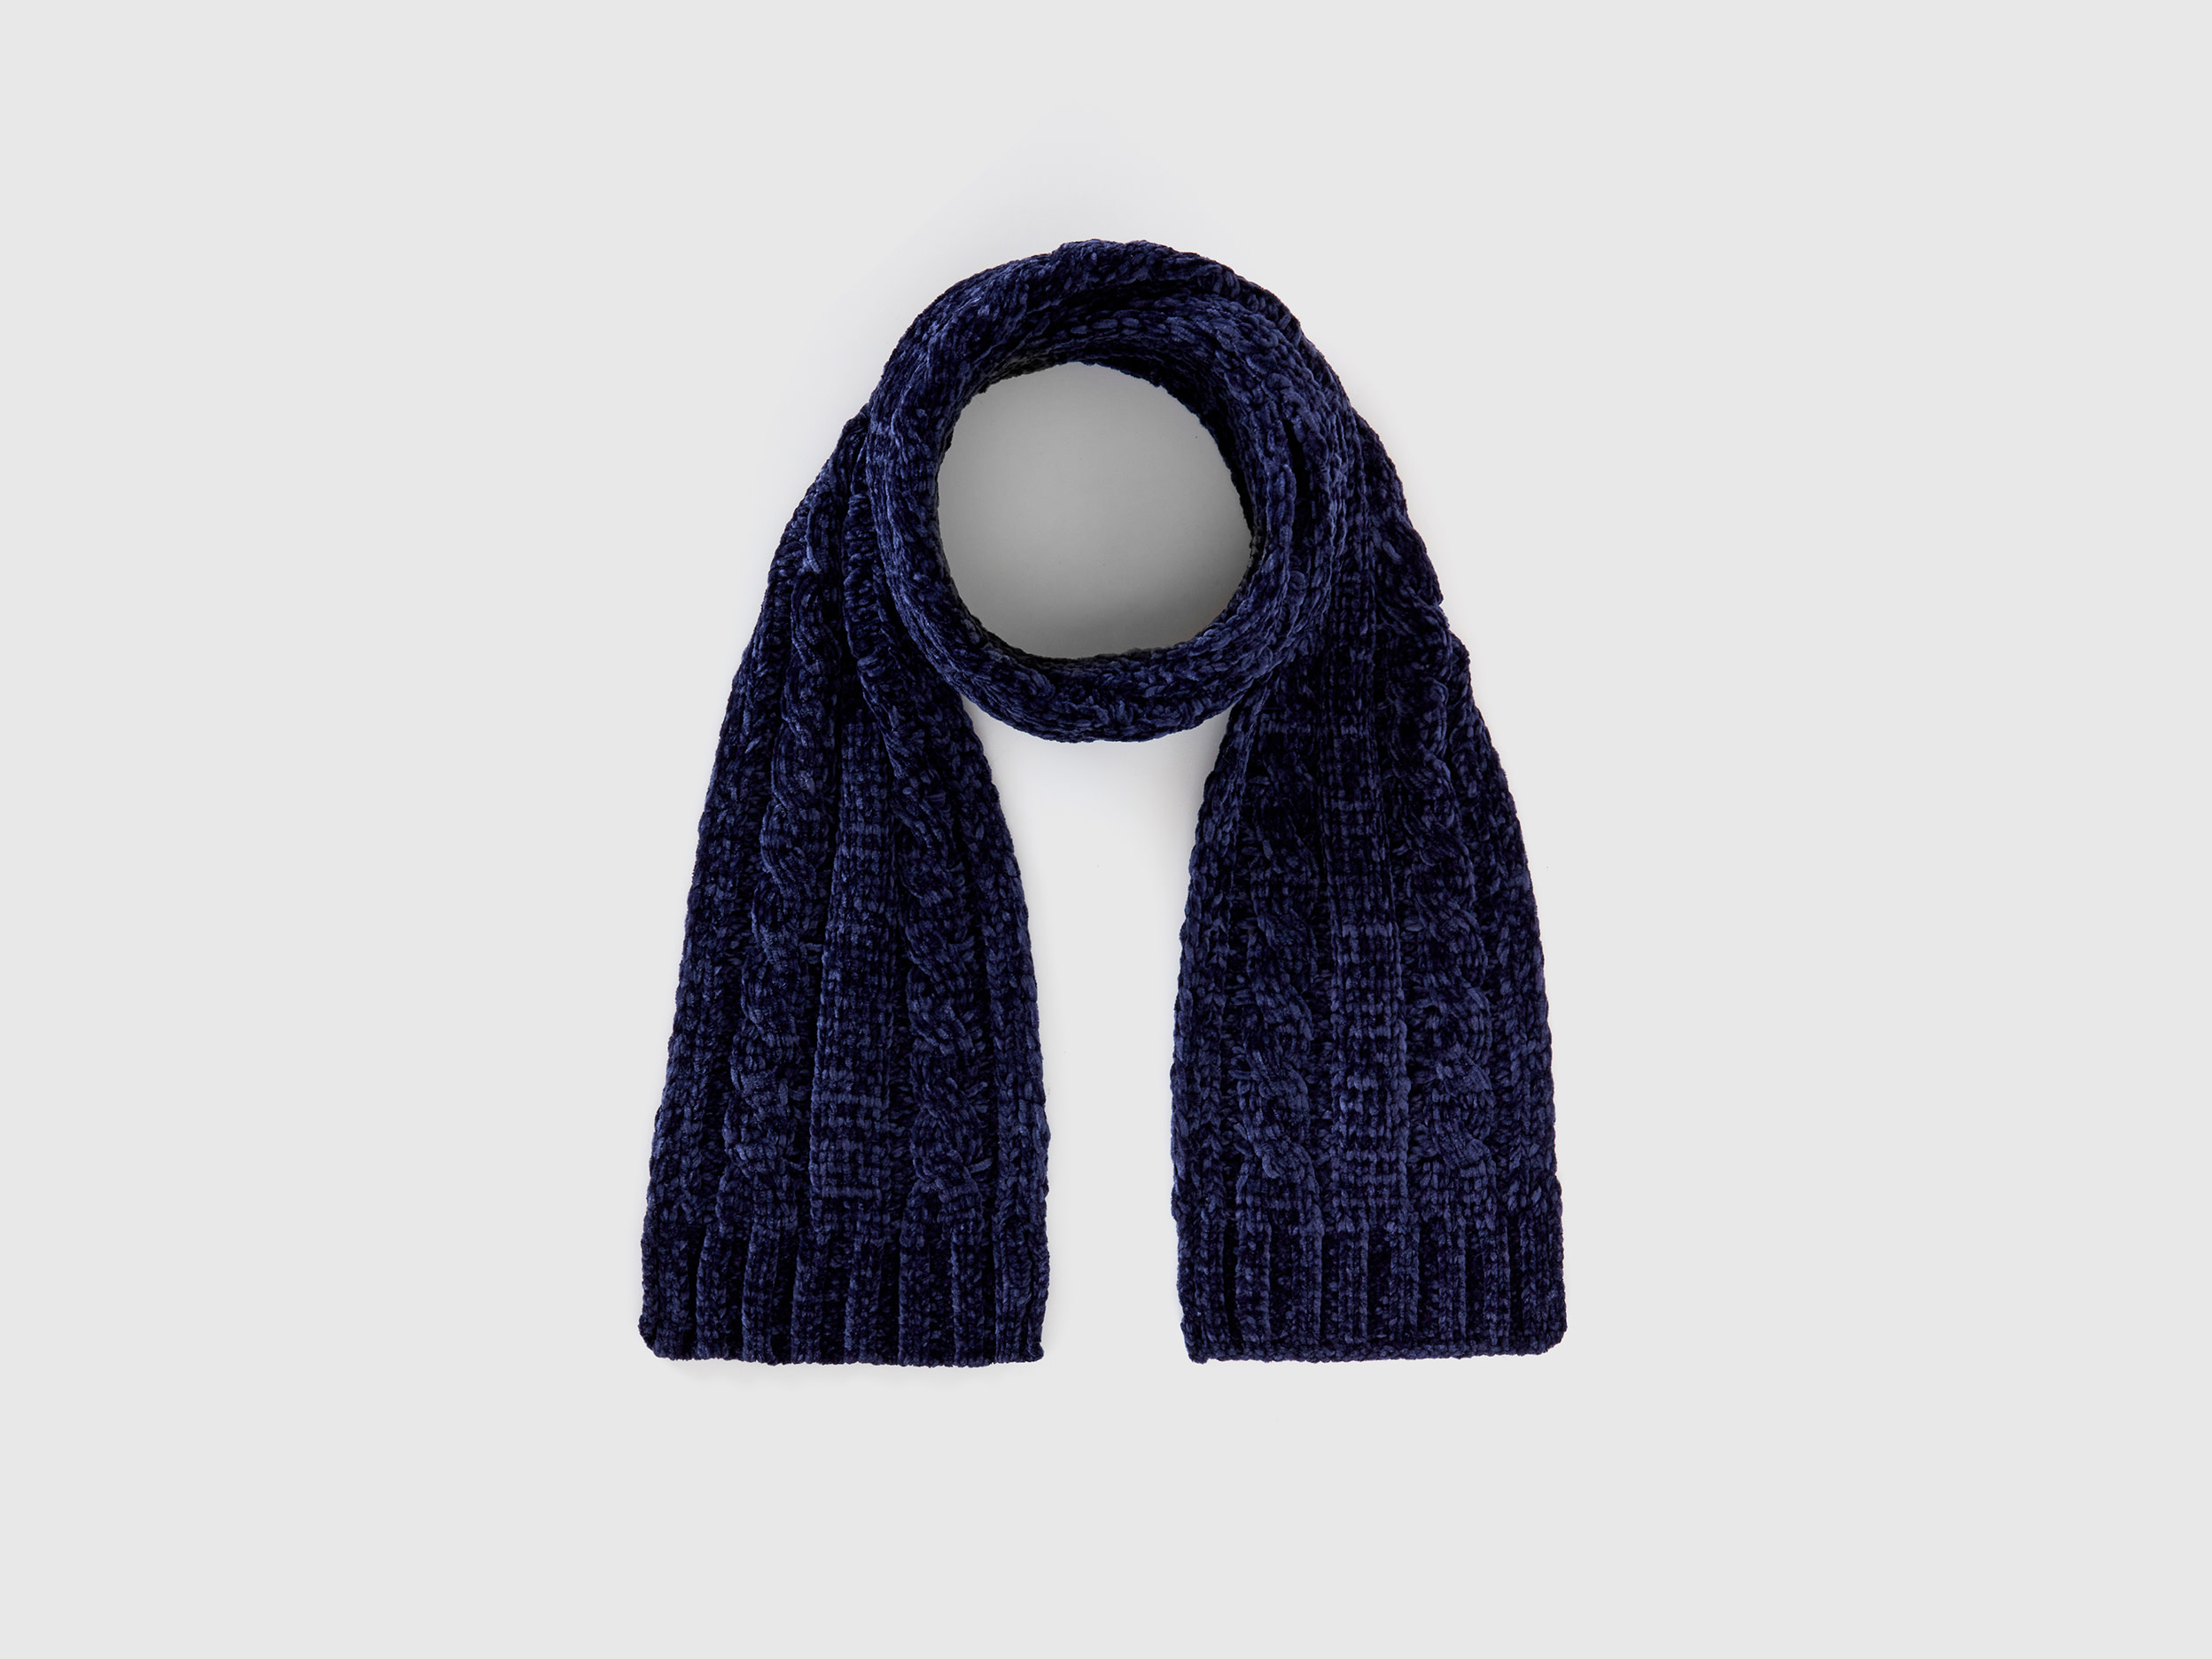 Benetton, Chenille Scarf With Cable Knit, size 4-6, Dark Blue, Kids